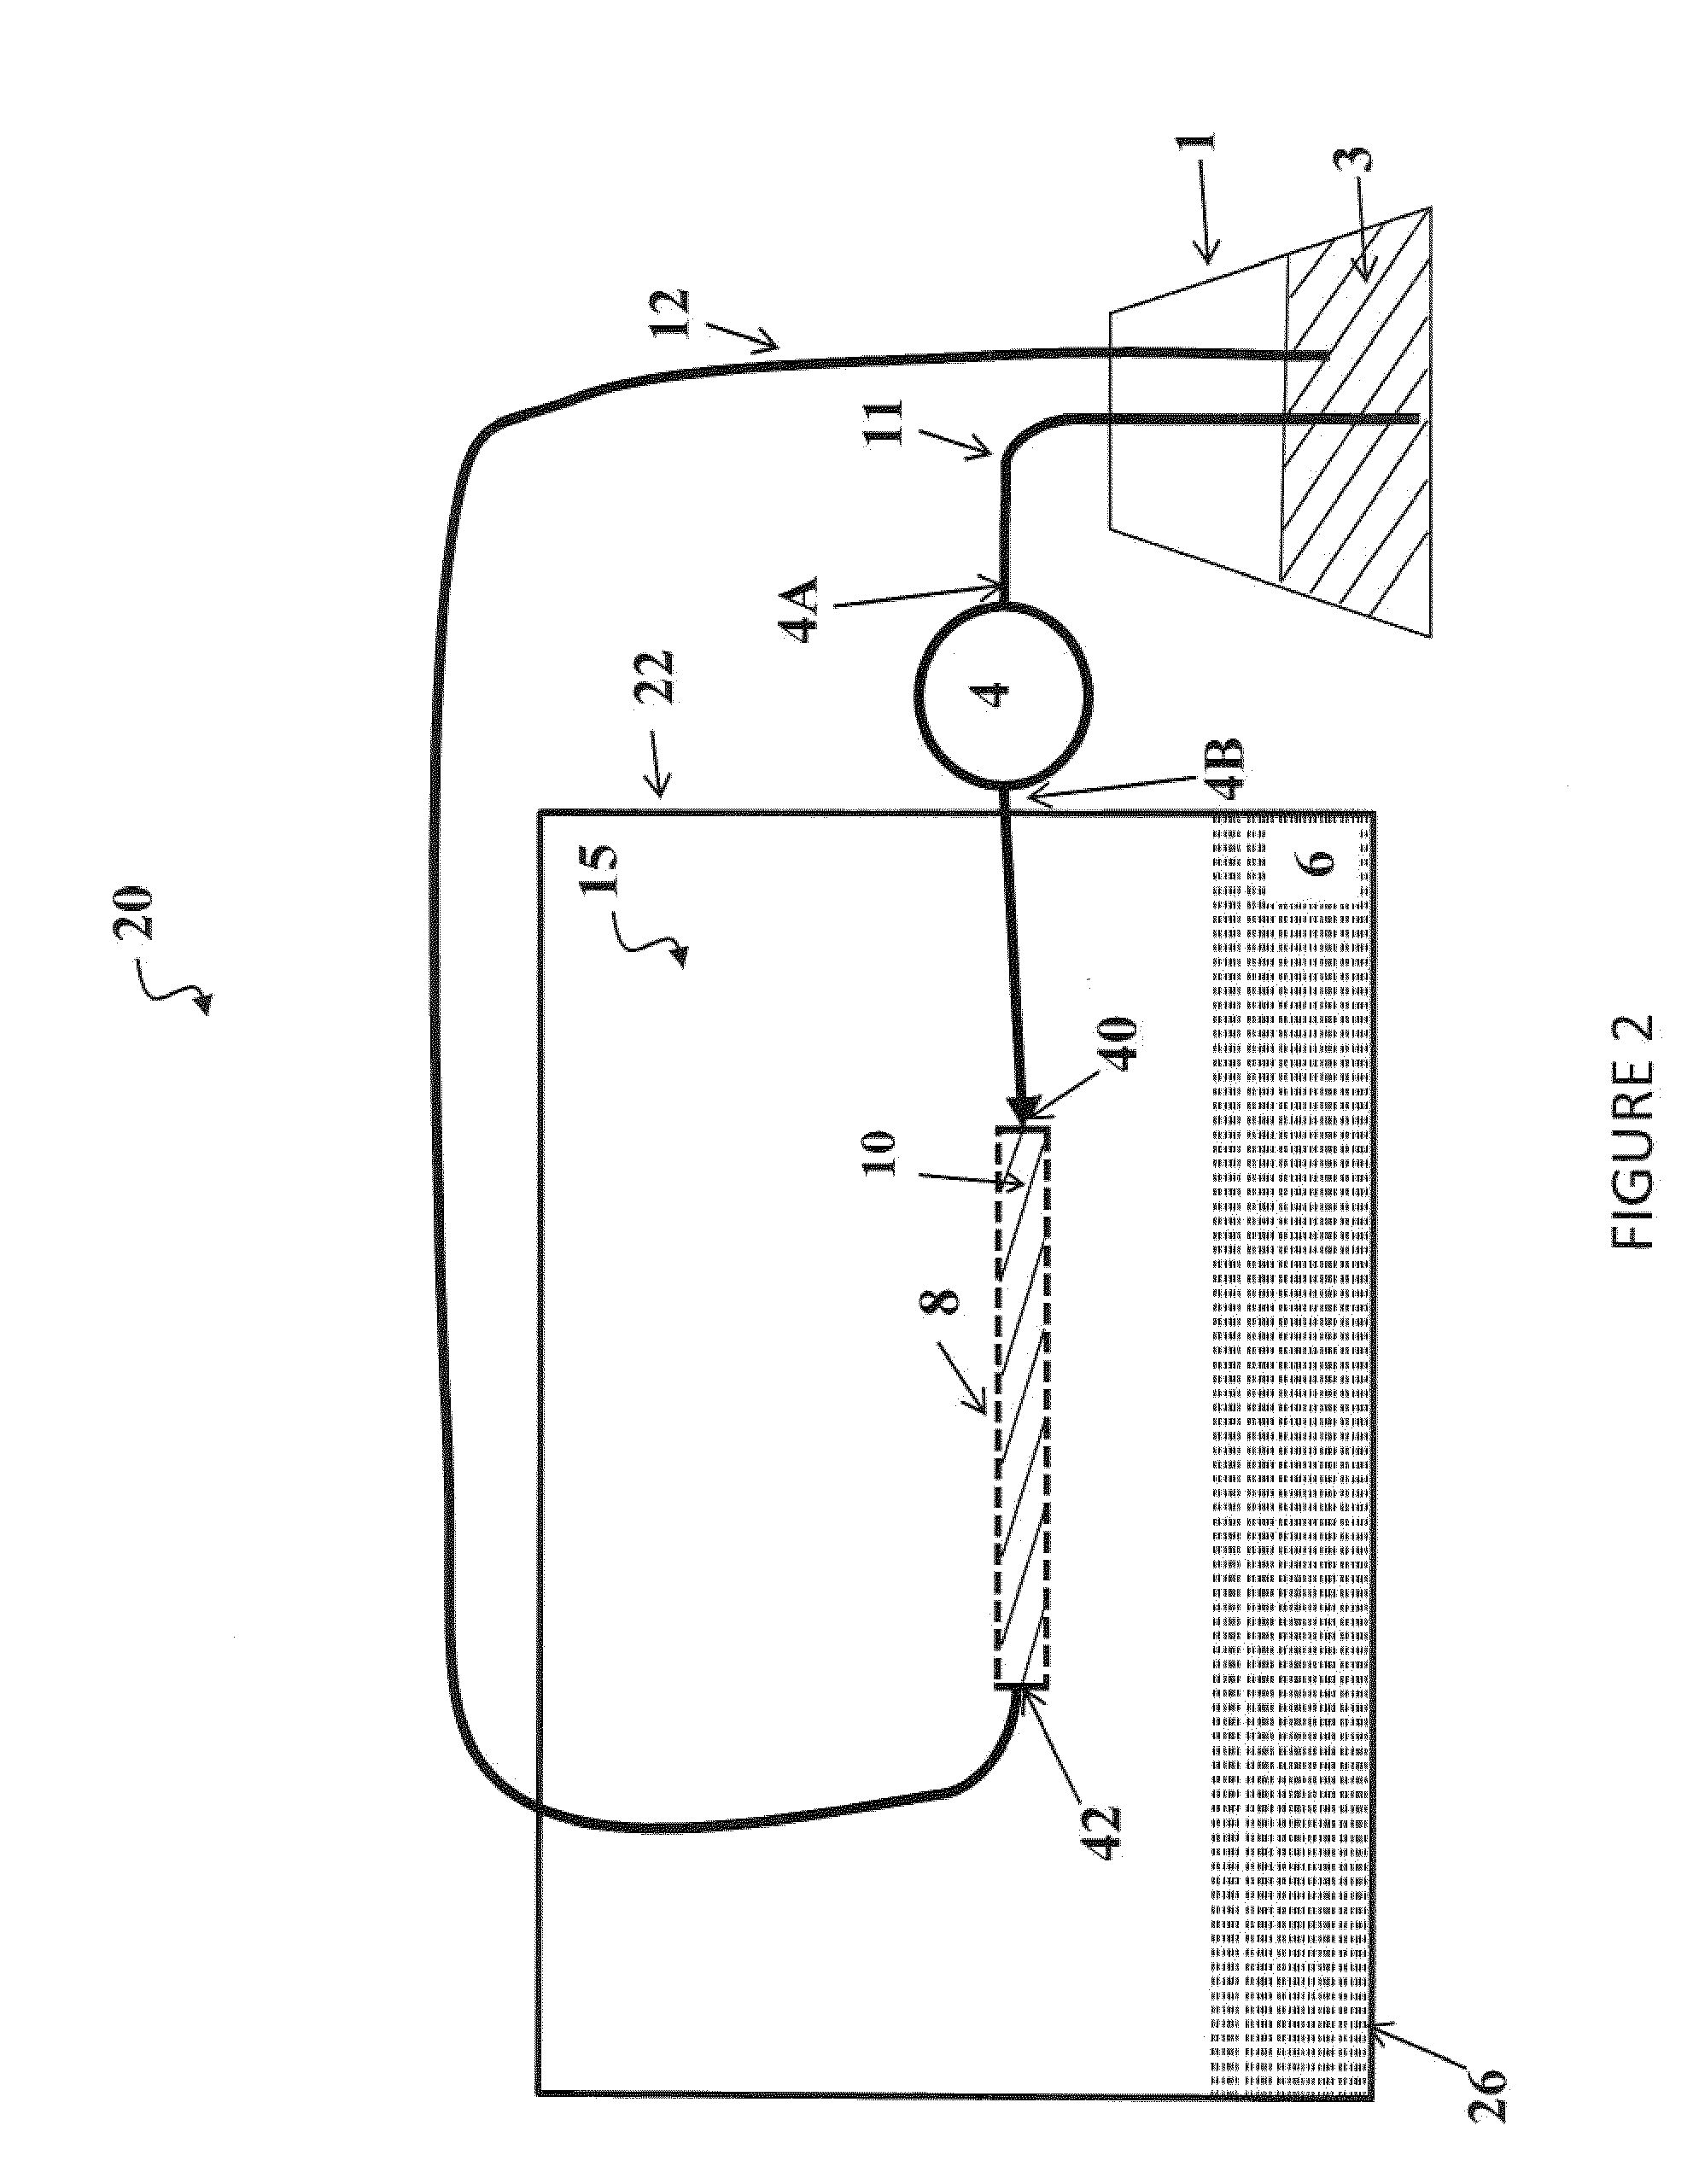 Gaseous ammonia removal system